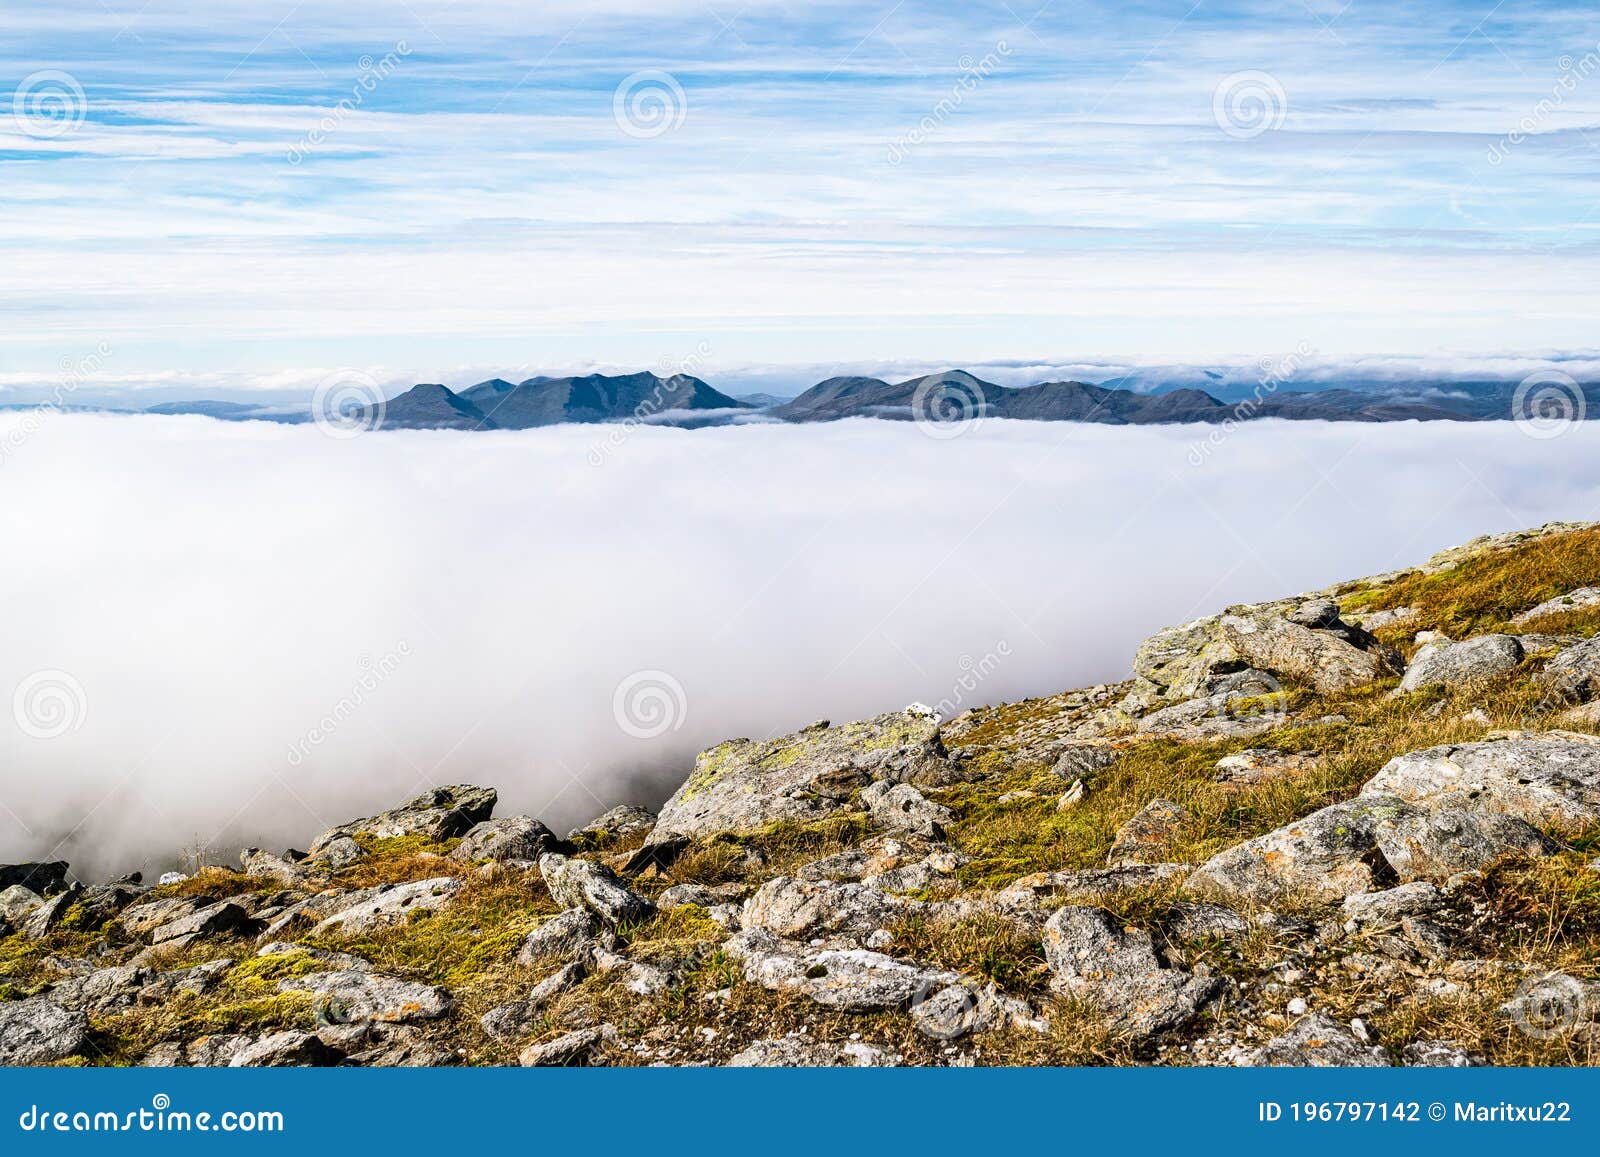 cloud inversion in scottish highlands seen from ben lui.